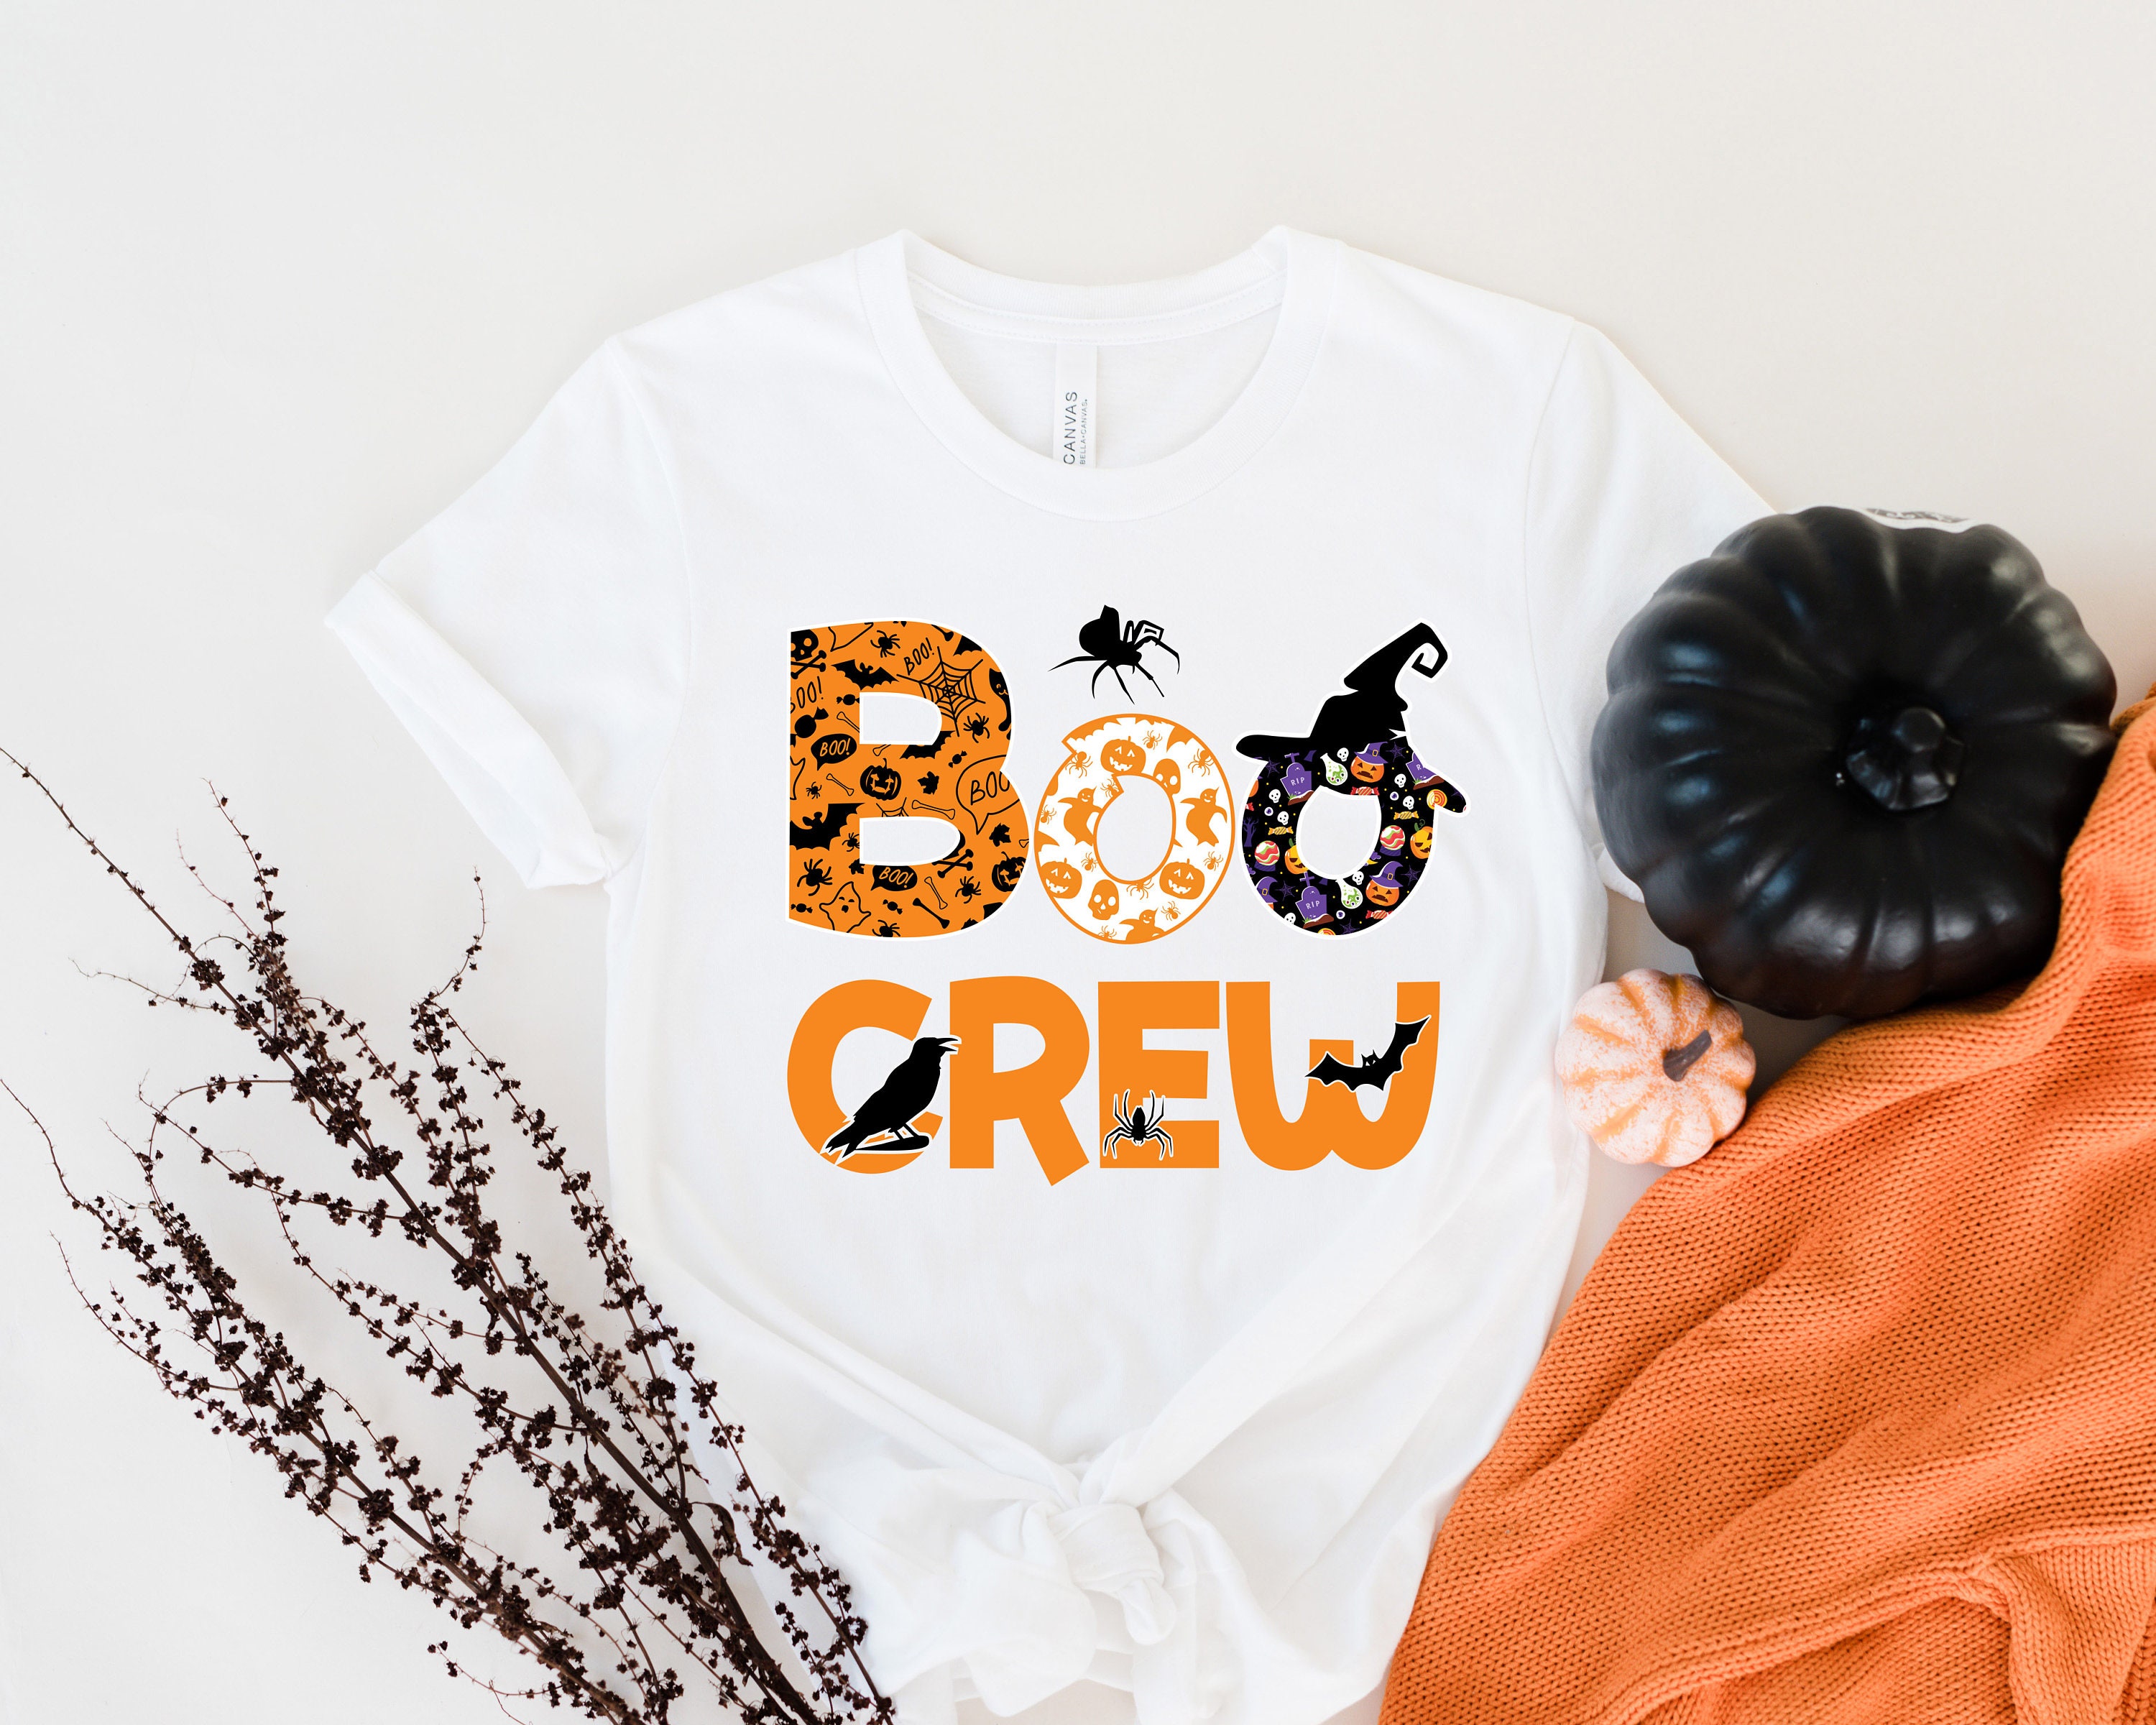 Boo Halloween, Shirt, Boo Crew Halloween Shirts, Shirts,halloween Crew - Family Shirt, Shirts,happy Halloween Etsy for Gift the Matching Family Boo